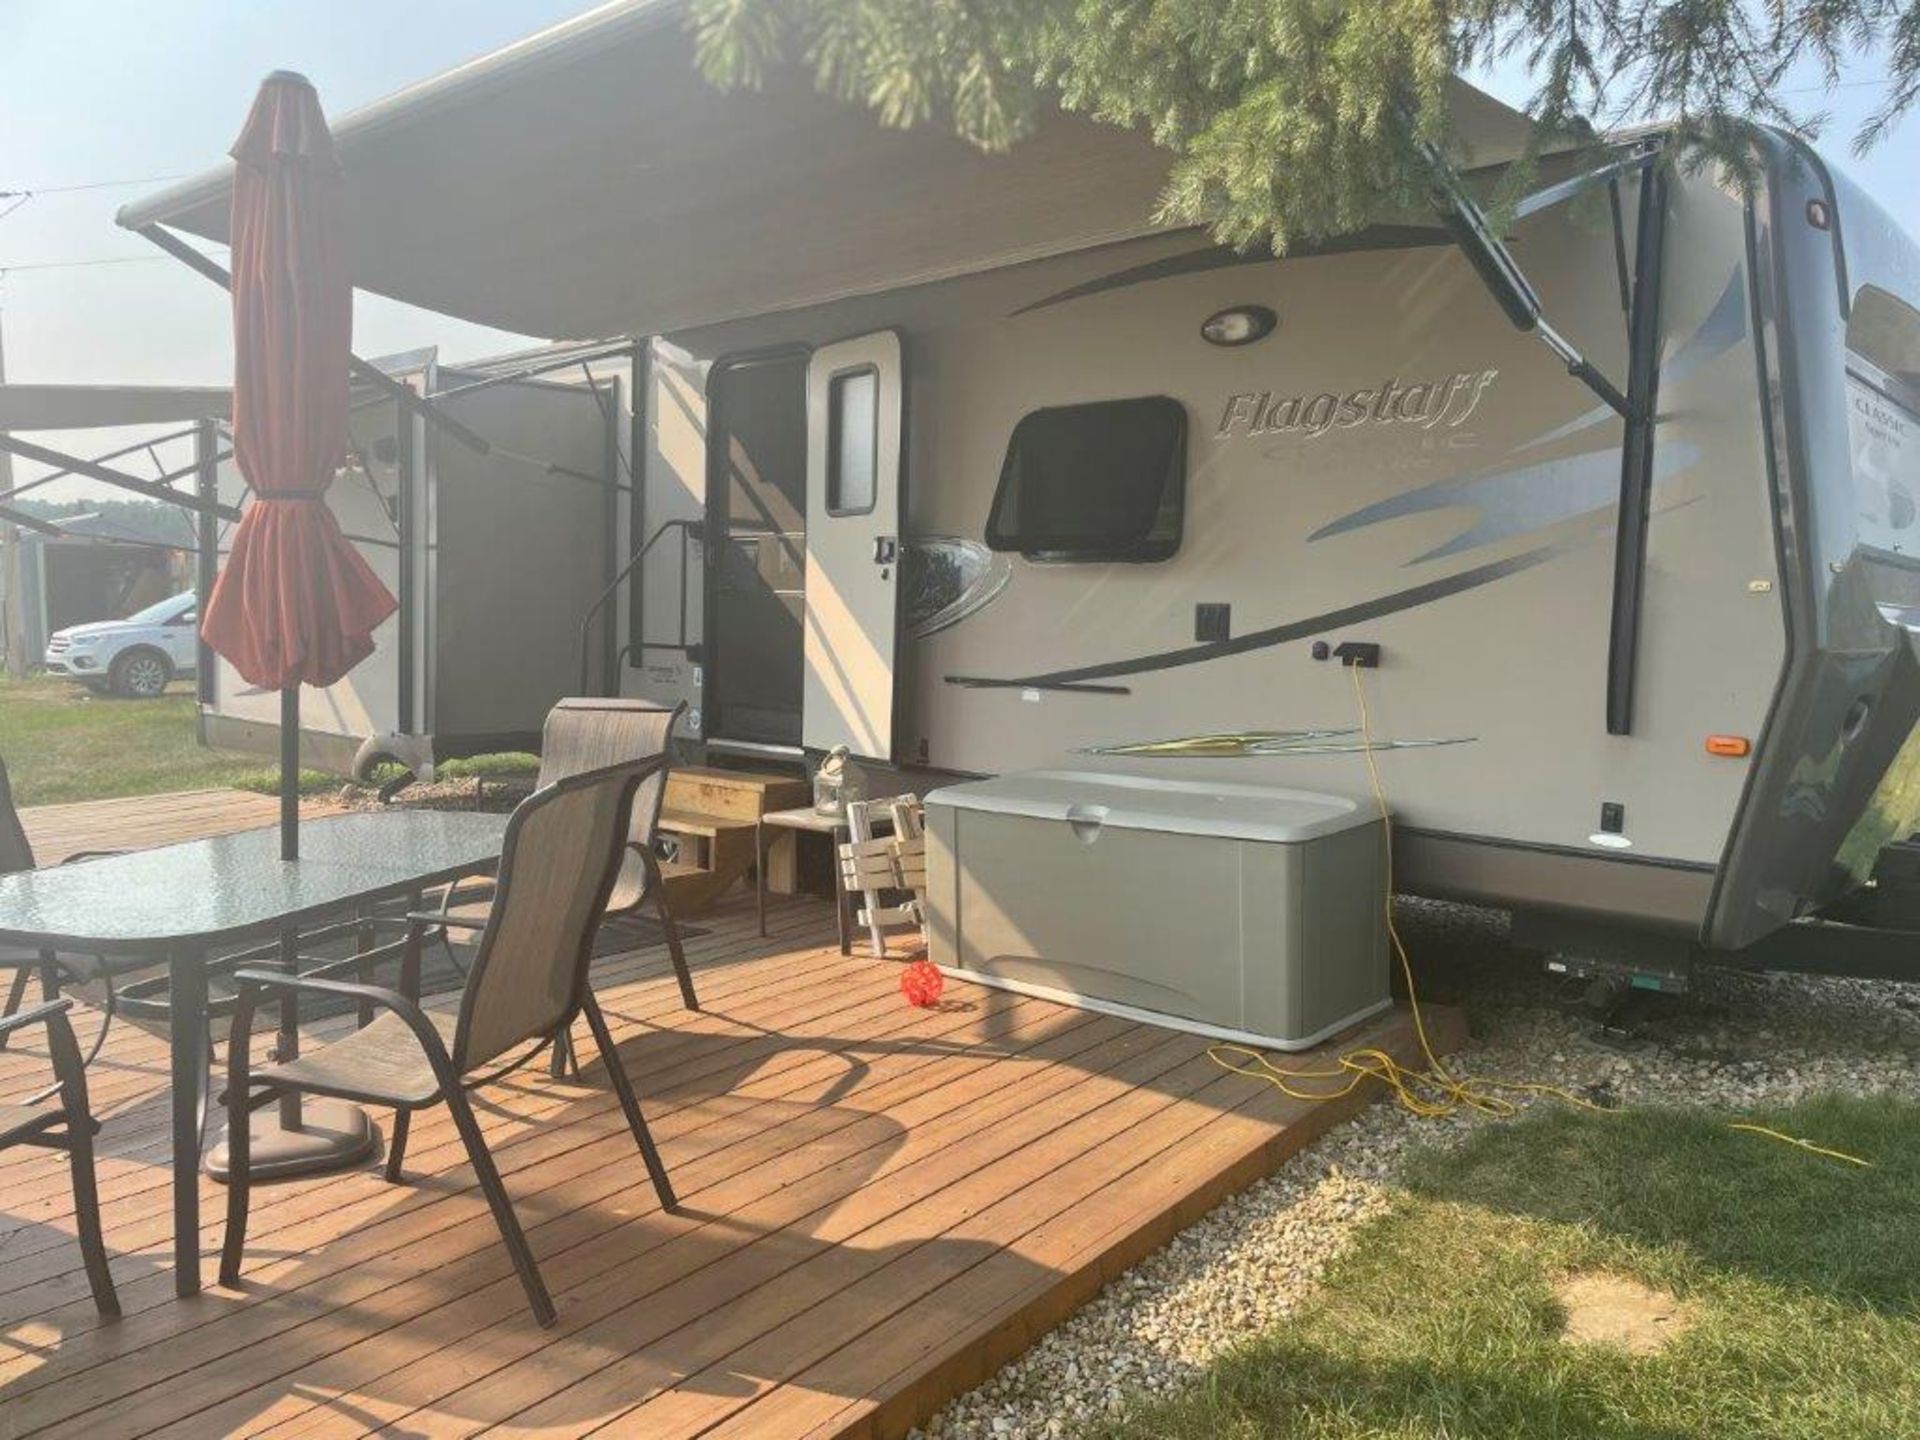 2015 FLAGSTAFF CLASSIC SUPER LITE 32FT TRAVEL TRAILER, 3 SLIDES, GREAT CONDITION BELOW 800 ROAD KMS! - Image 10 of 37